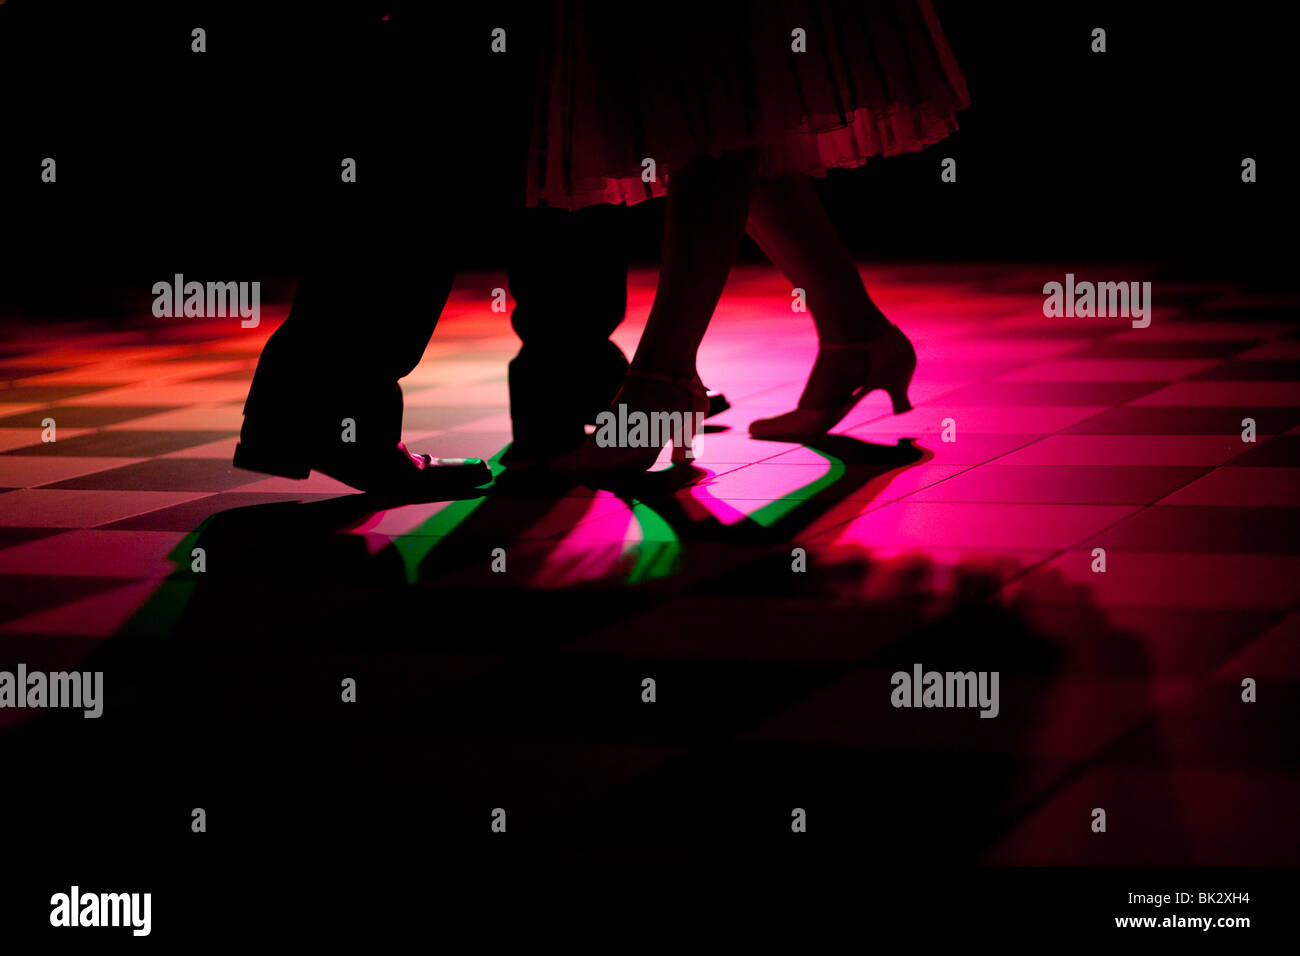 2 pair of feet dancing shown in the colored light on a dancefloor Stock Photo